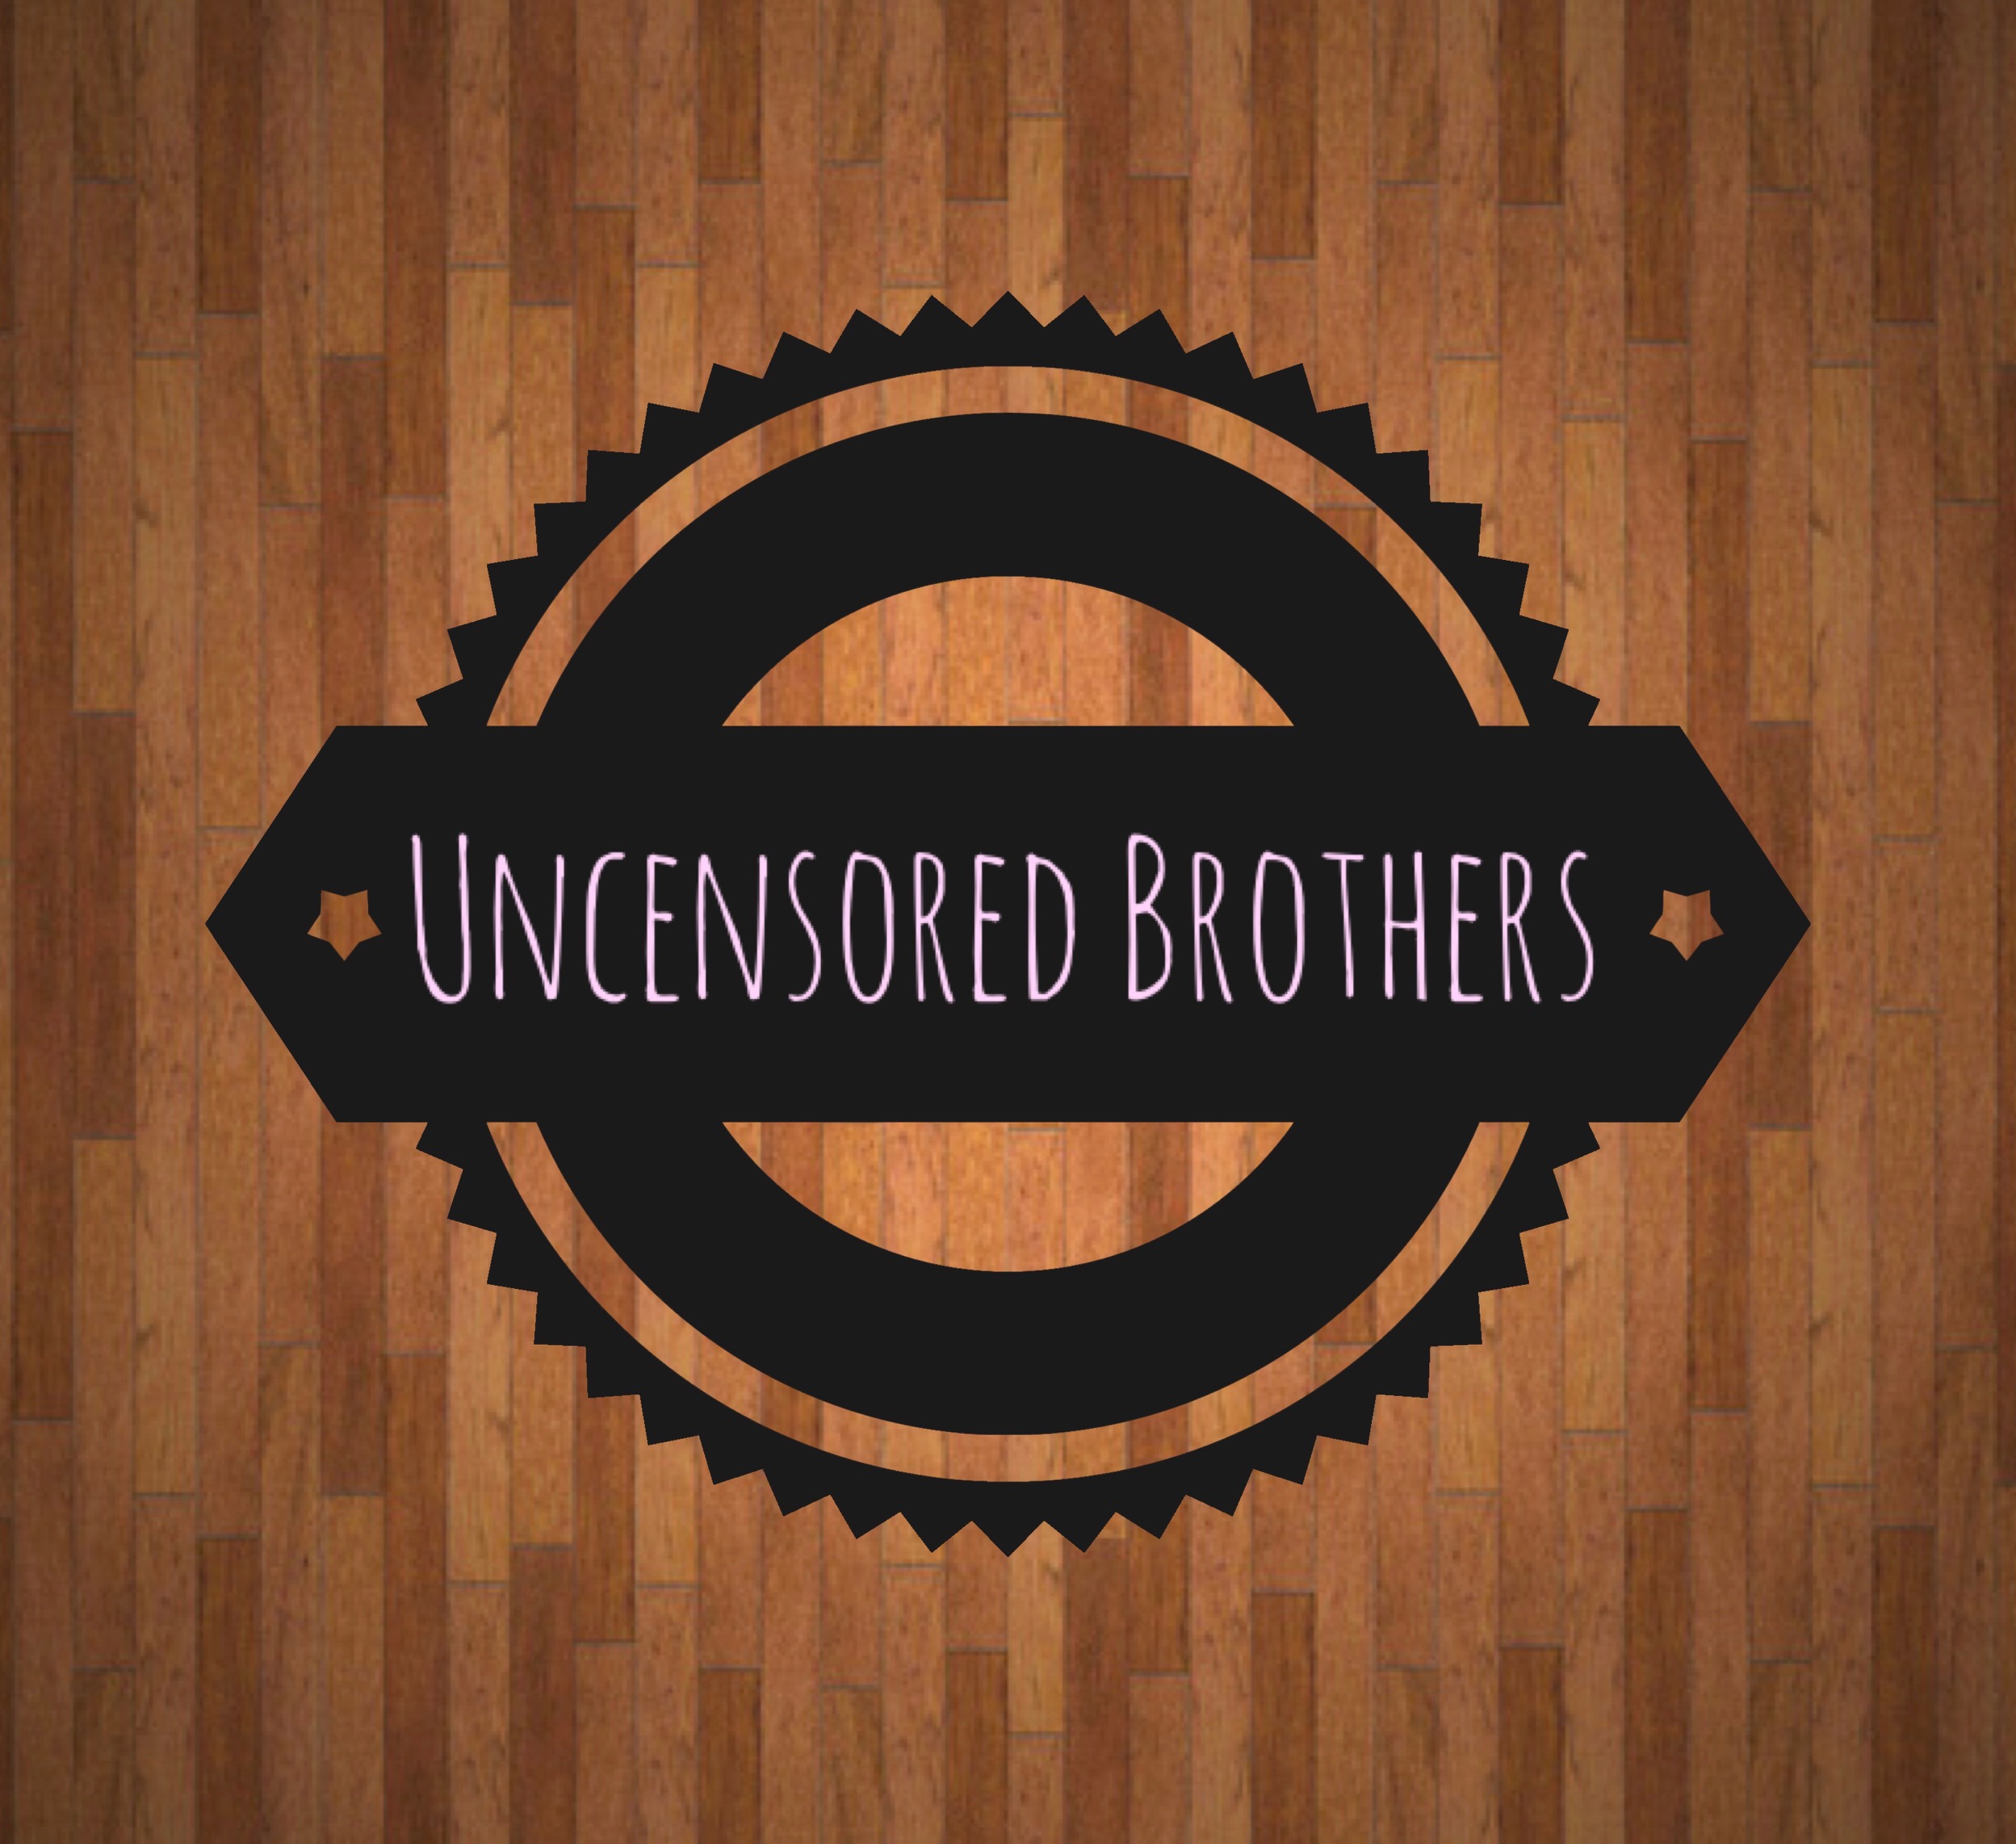 Uncensored Brothers